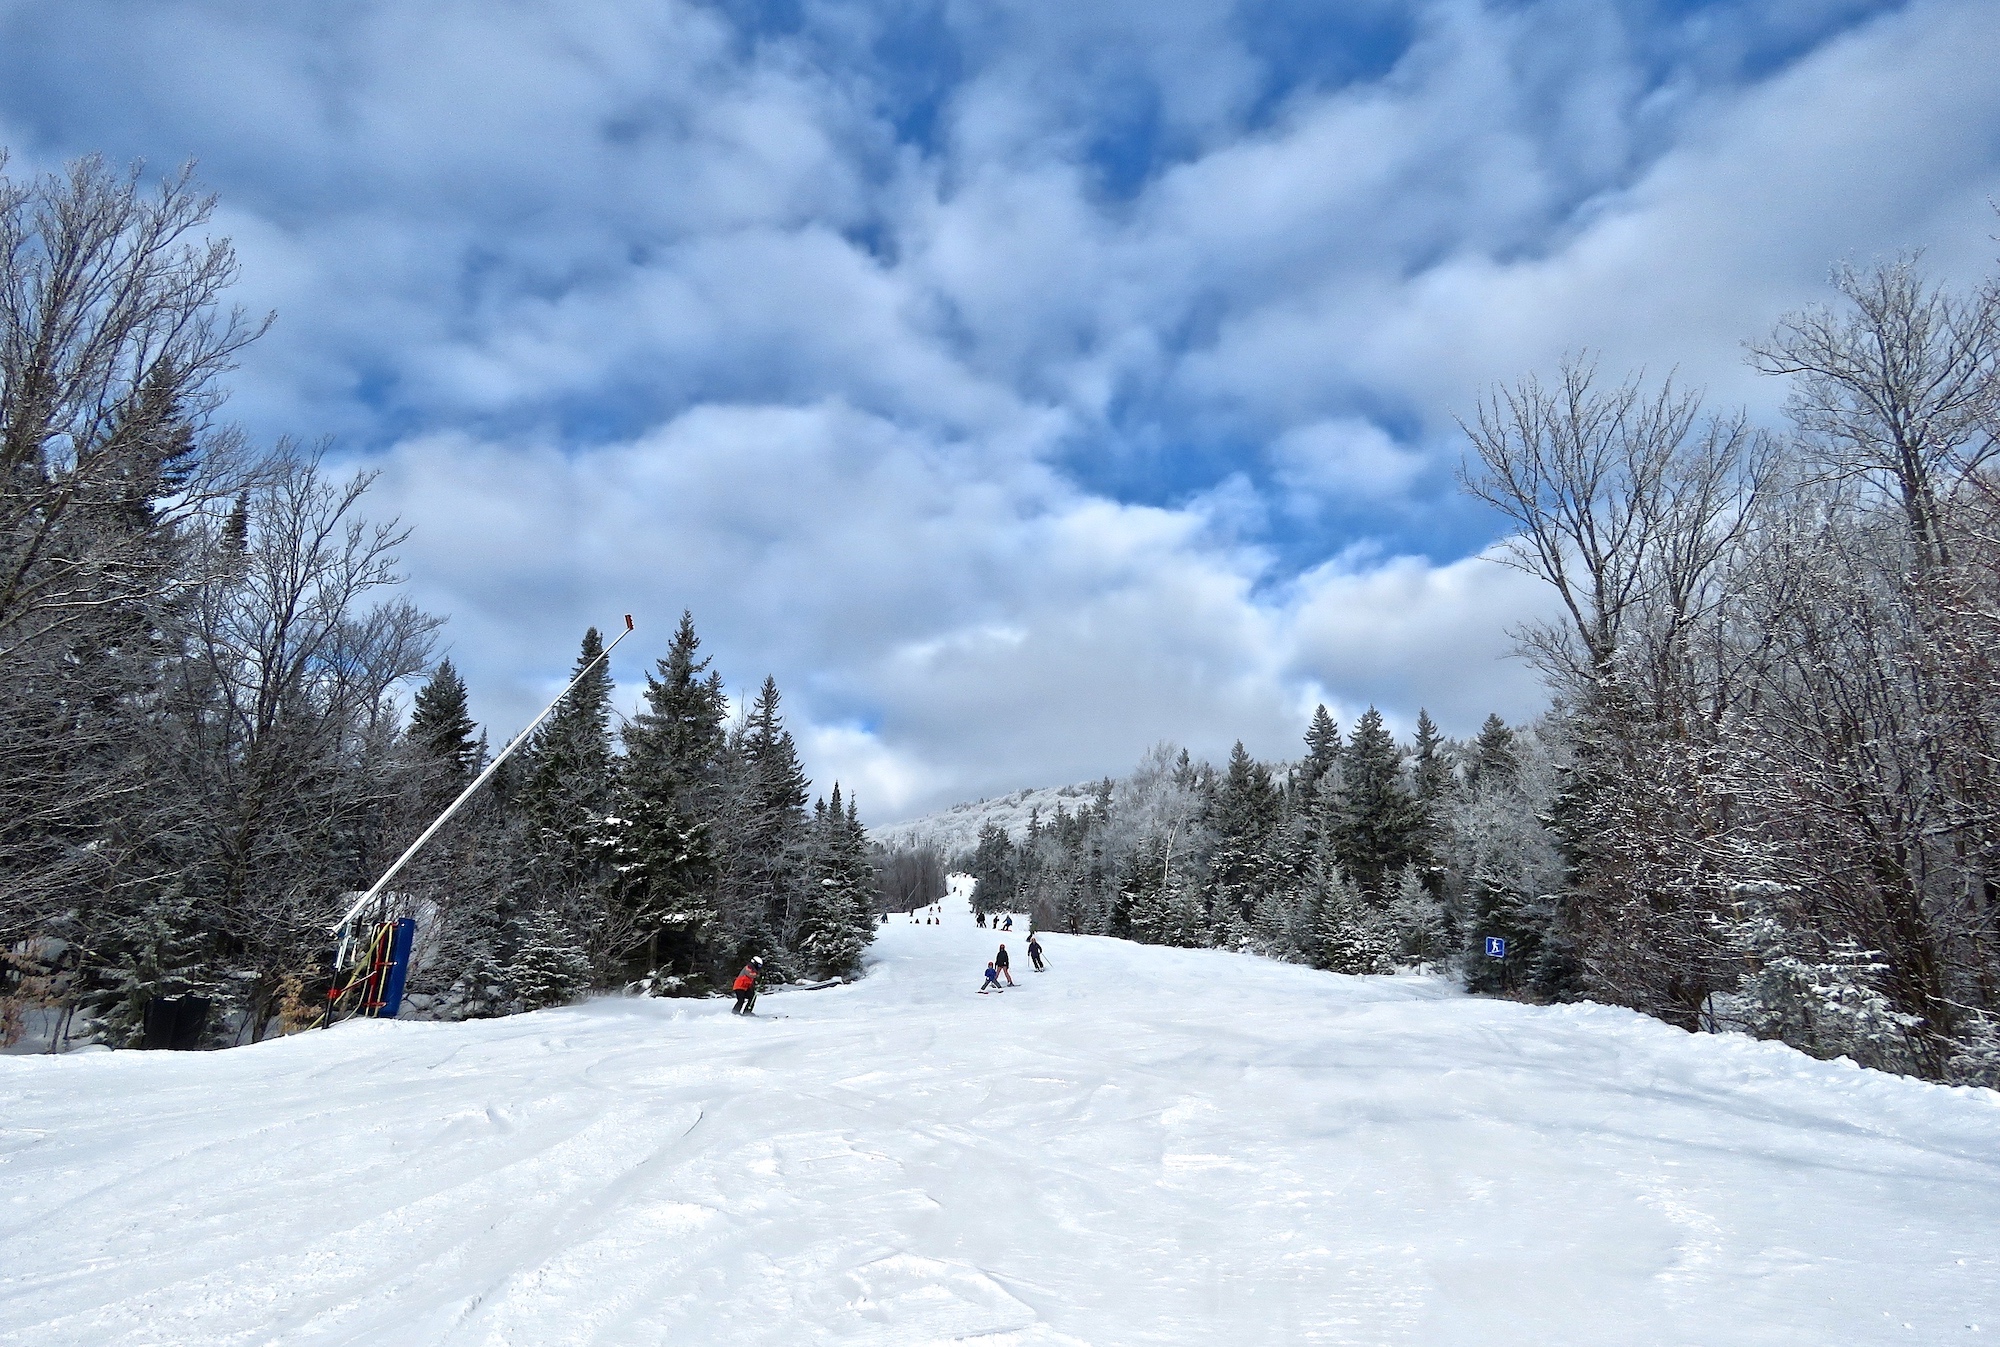 www.Tremblant360.com Photo. All rights reserved.